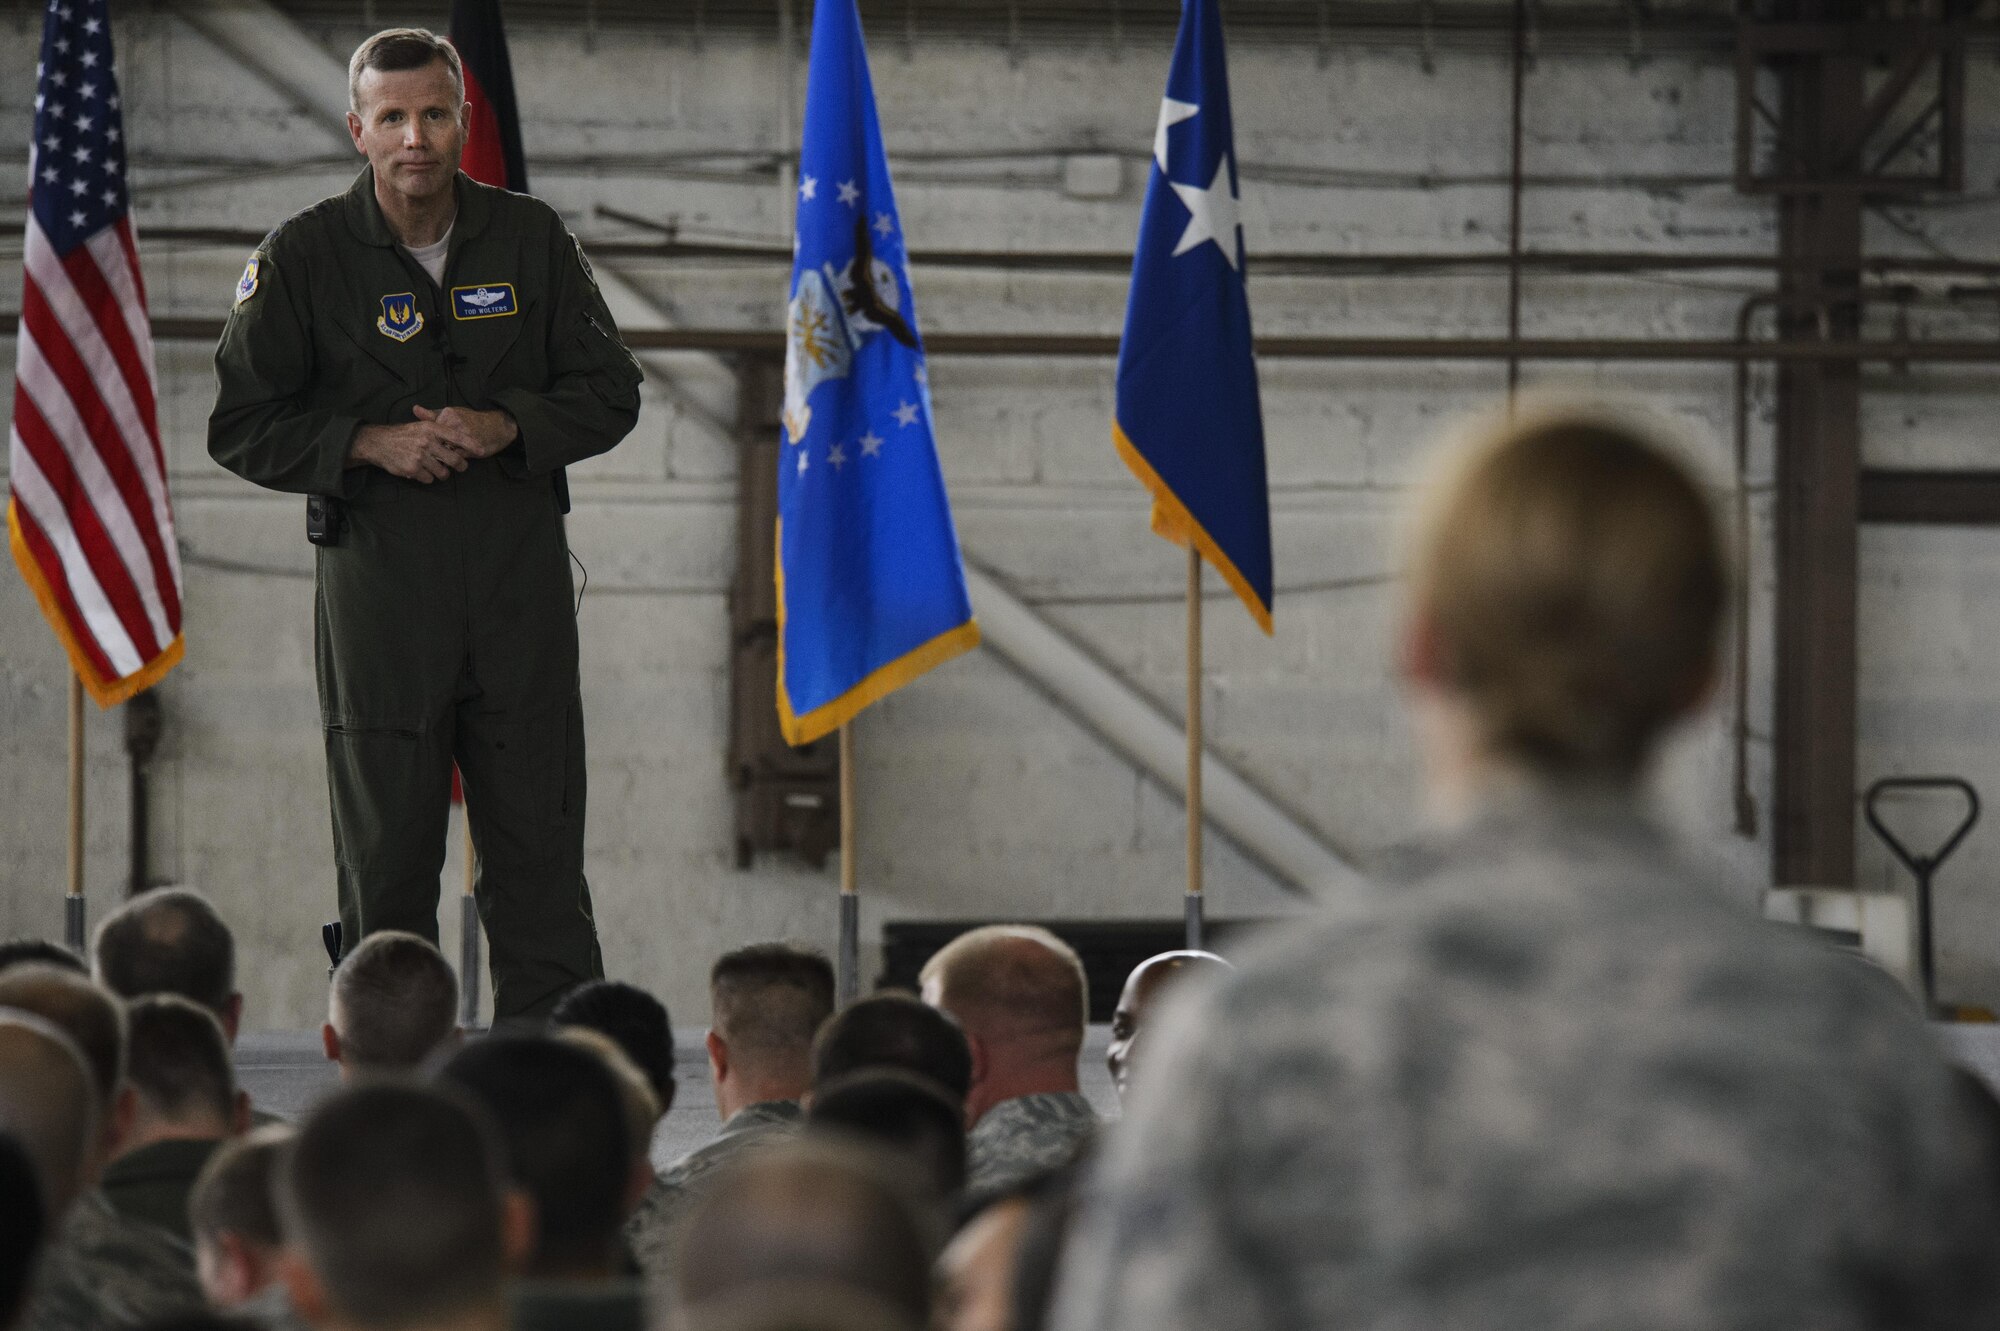 Gen. Tod D. Wolters, U.S. Air Forces in Europe and Air Forces Africa commander, listens to a question from Senior Airman Kimberly Deveau, 52nd Medical Operations Squadron medical technician, during a question and answer portion of an all call at Hangar One on Spangdahlem Air Base, Germany, Oct. 6, 2016. This visit represented his first time at Spangdahlem Air Base since assuming command in August 2016. (U.S. Air Force photo by Staff Sgt. Jonathan Snyder)